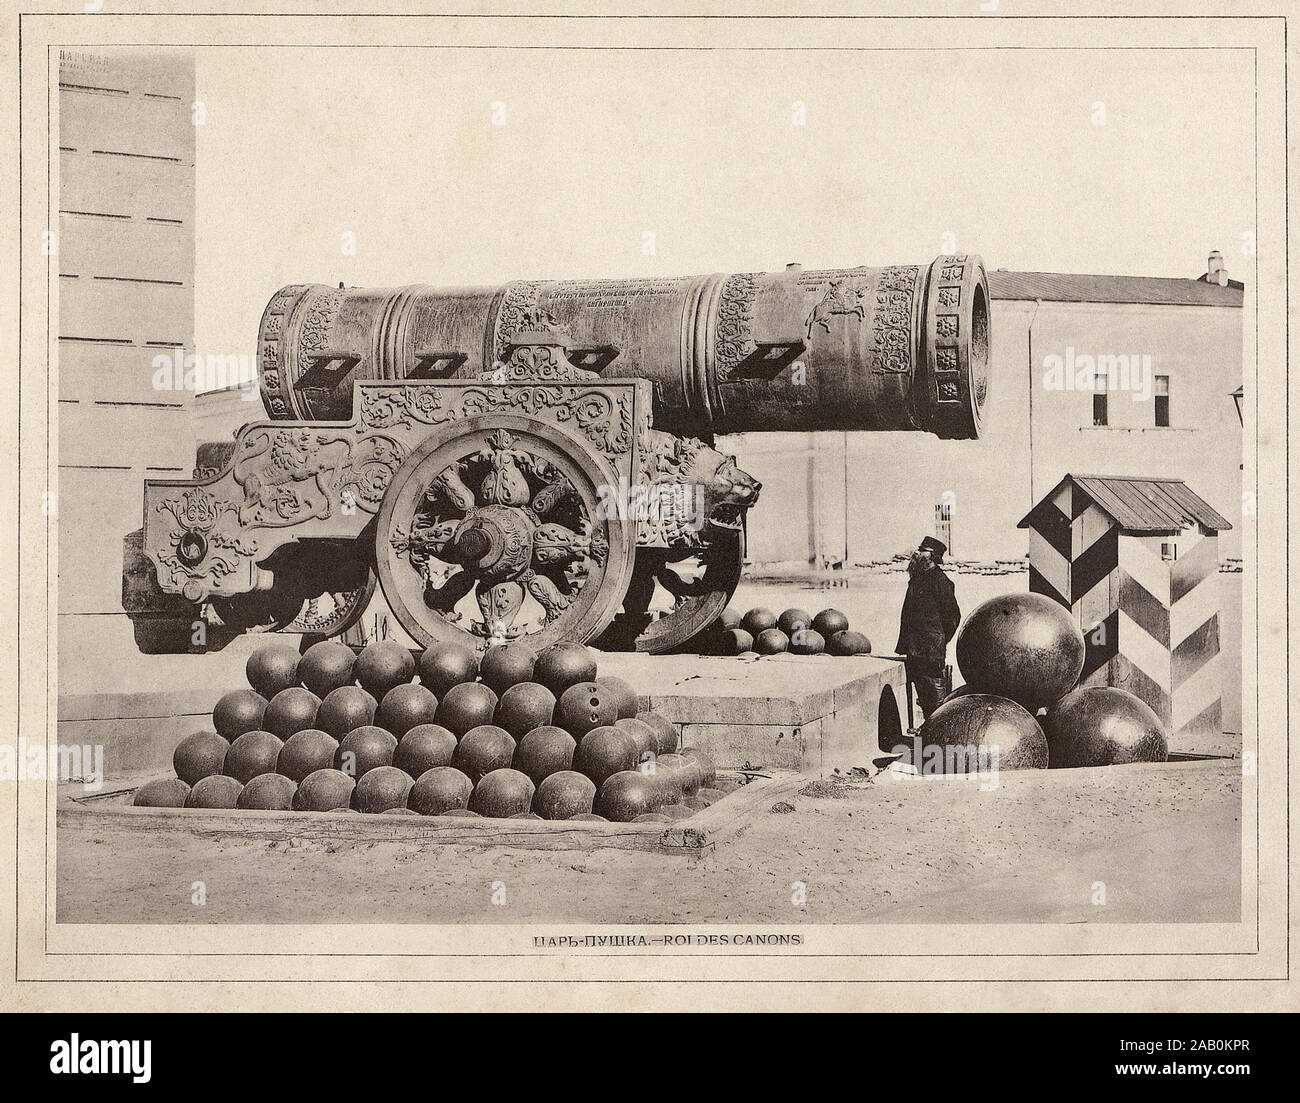 The Tsar Cannon is a large early modern period artillery piece (known as a bombarda in Russian) on display on the grounds of the Moscow Kremlin. It is Stock Photo